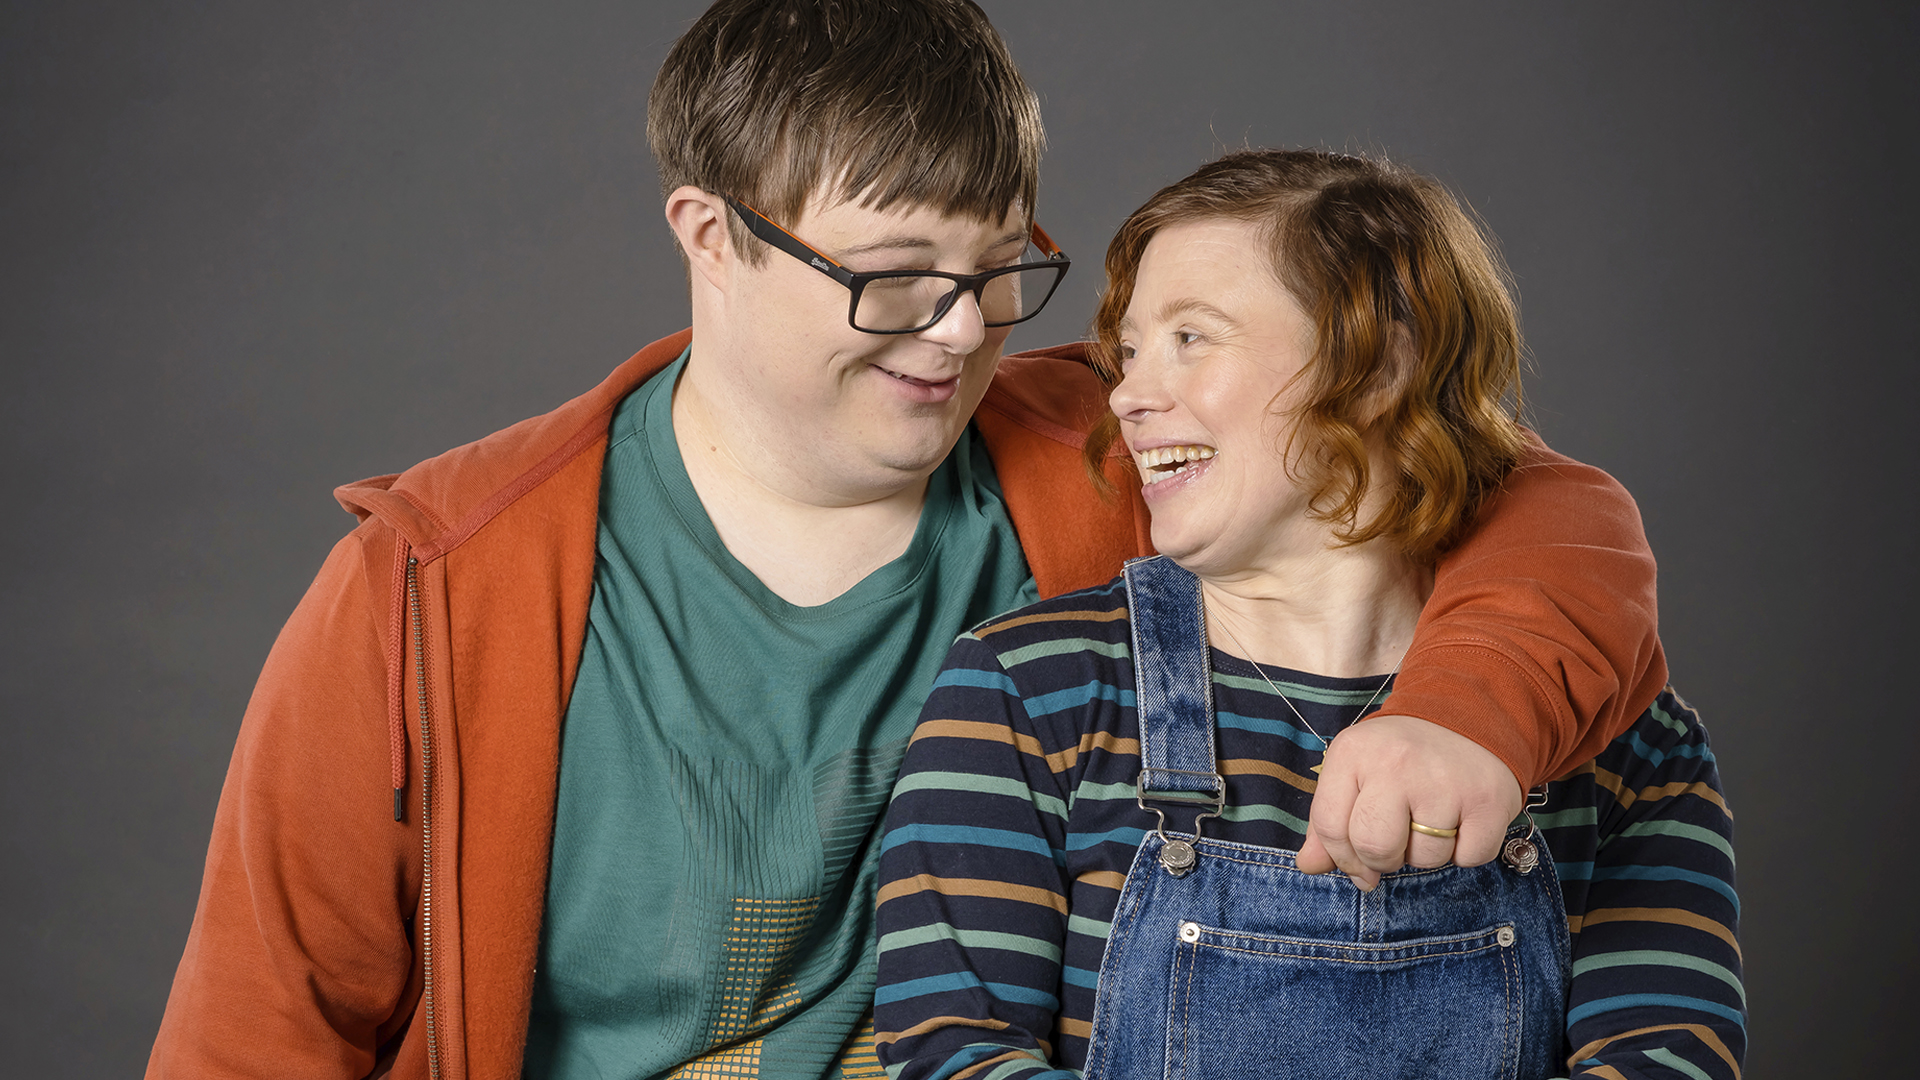 Leon Harrop and Sarah Gordy as Ralph and Katie